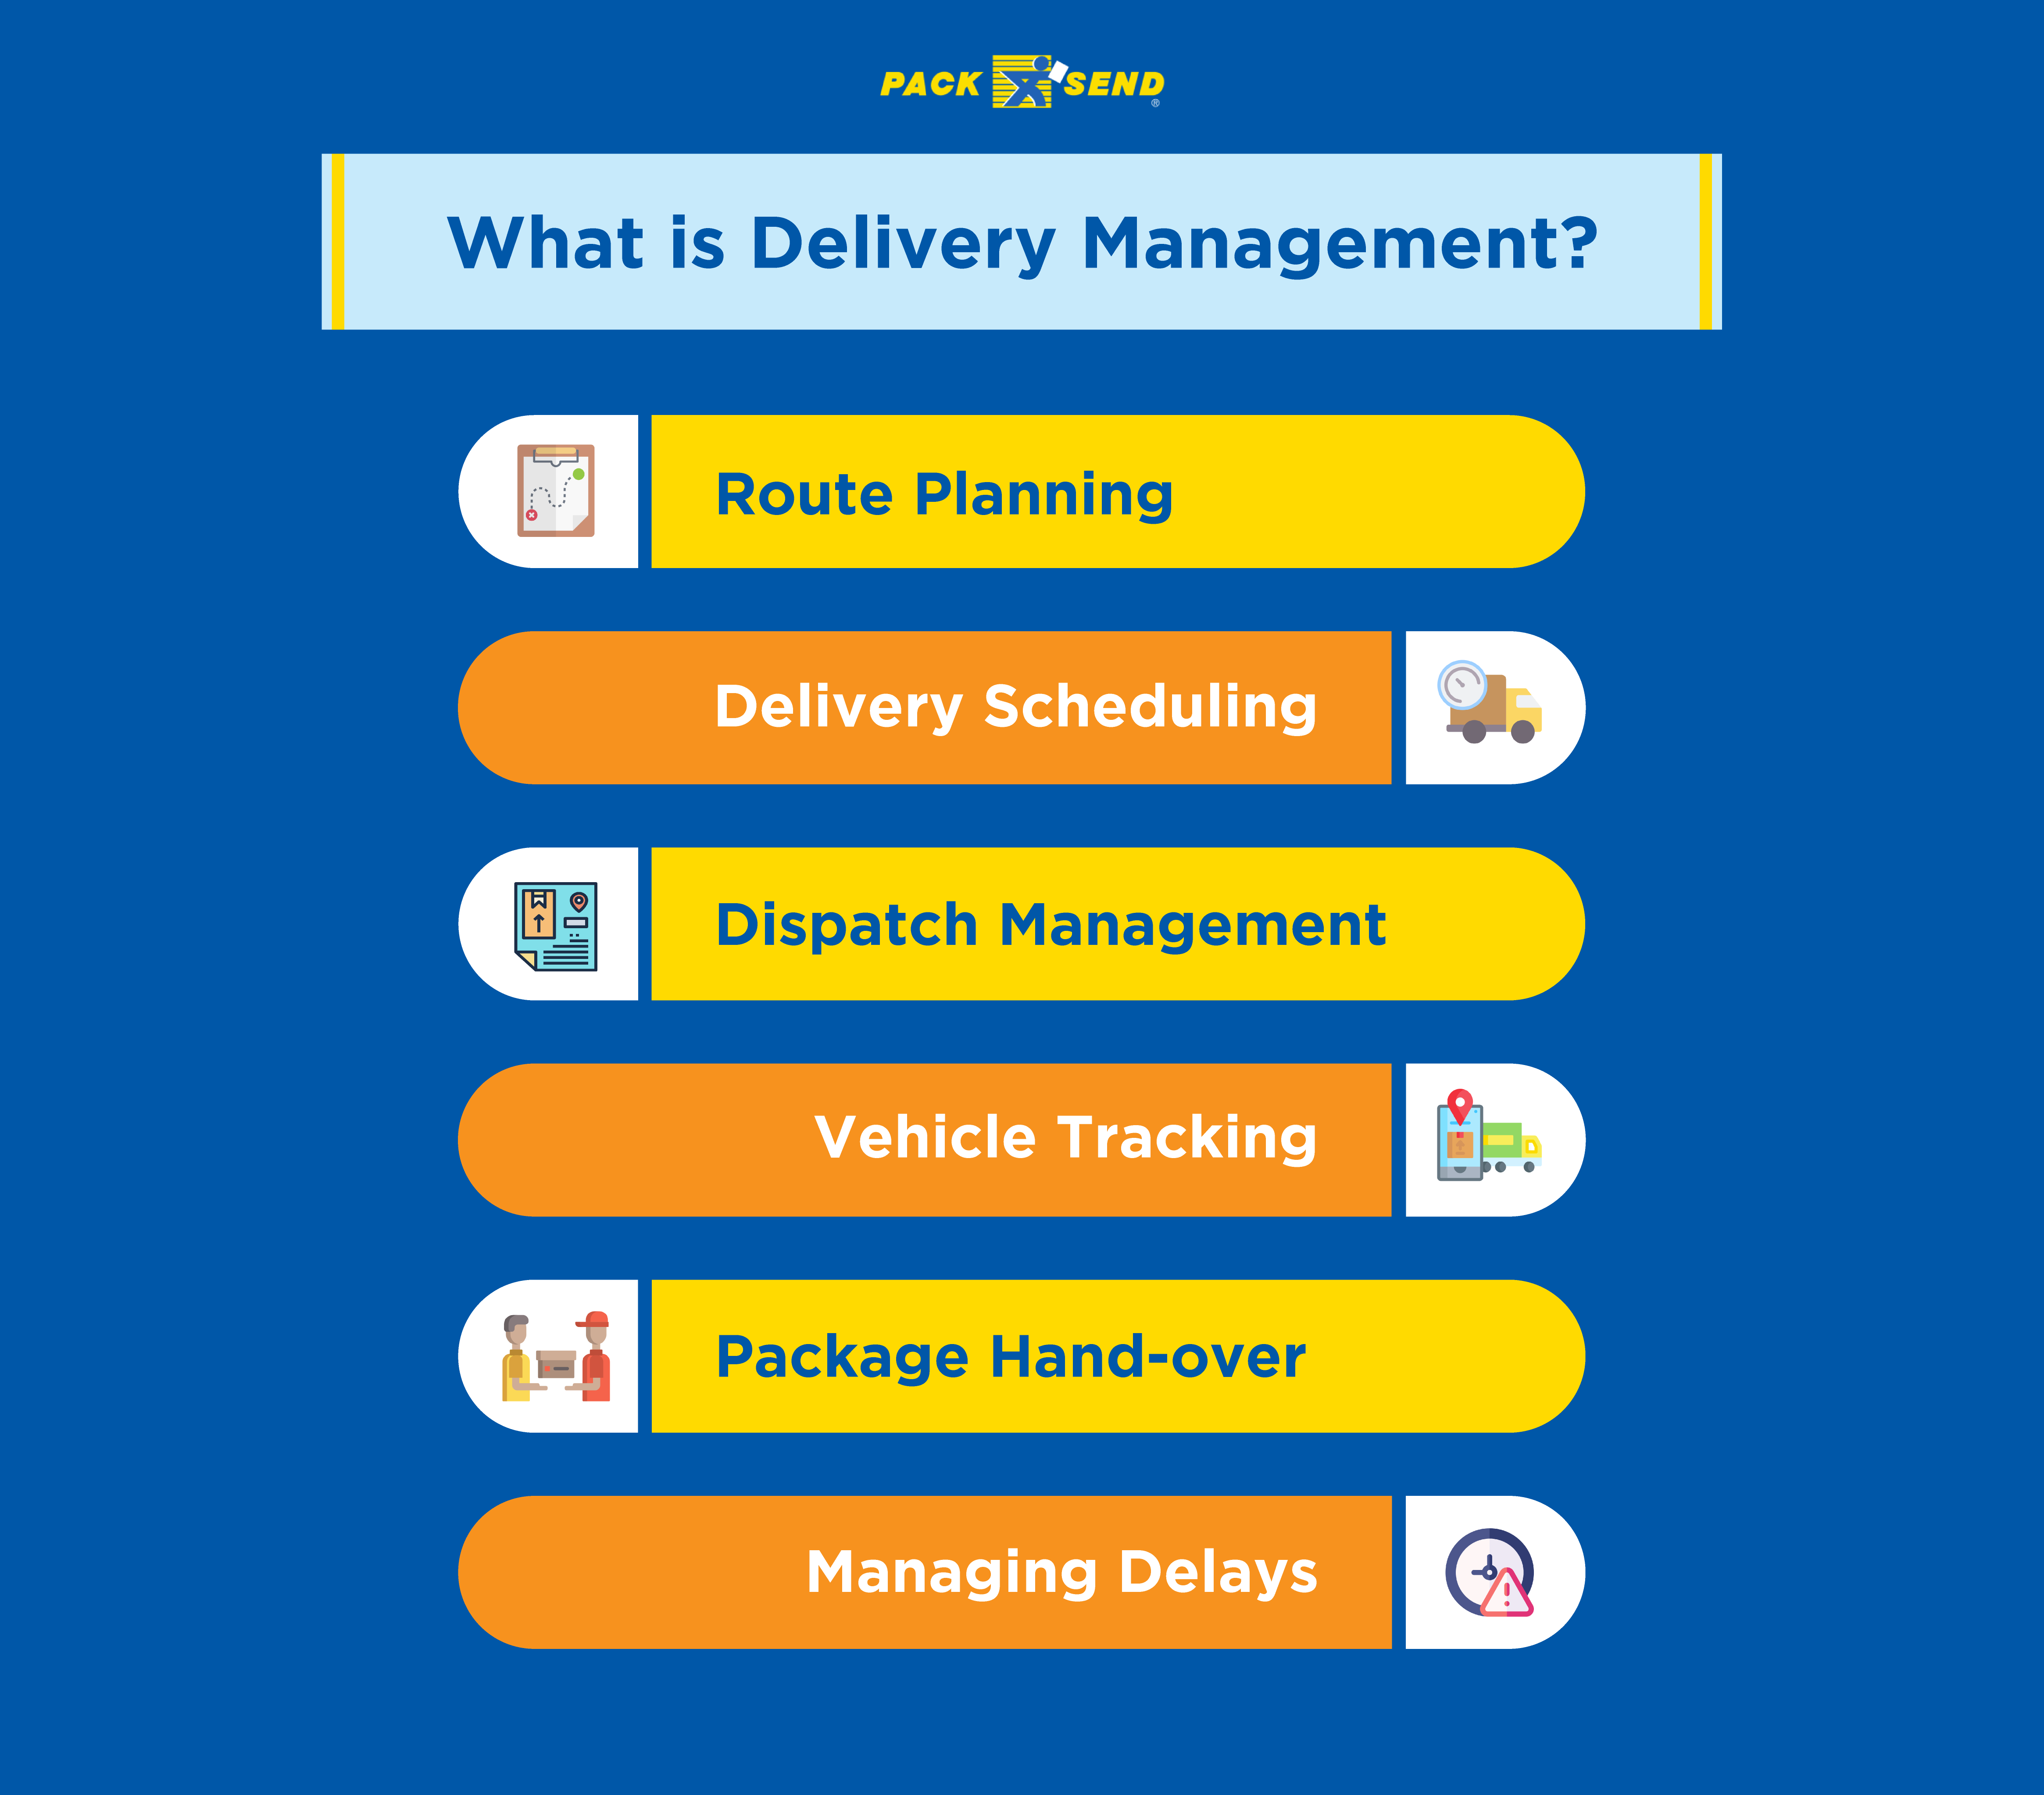 Things included in delivery management